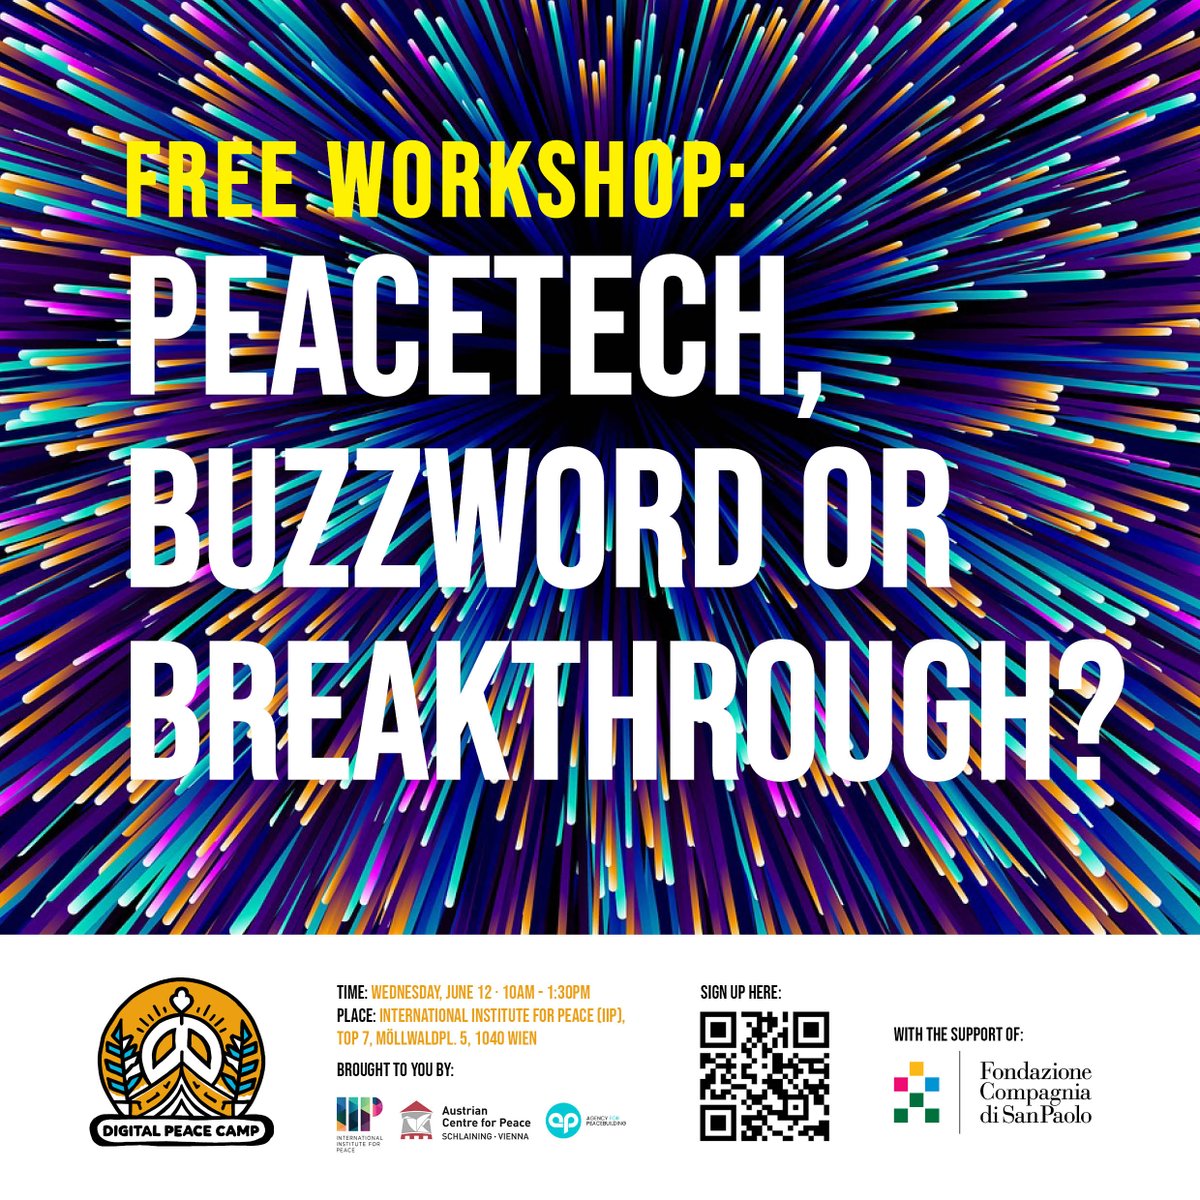 Join us, @iipvienna and @agencypb in Vienna for the 1st Digital Peace Camp: 'PeaceTech, buzzword or breakthrough?' 🌐 Let's explore technology's role in conflict prevention & resolution. June 12, 10am-1:30pm. Free tickets are available here: tinyurl.com/b3ctx3dm